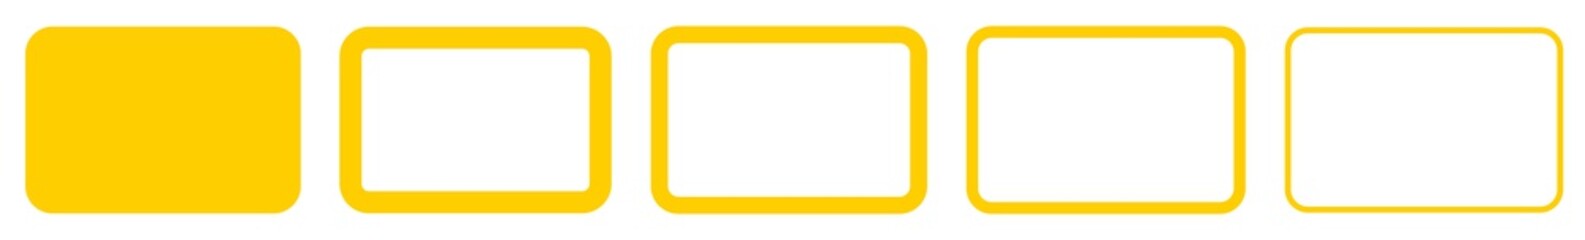 Rectangle Icon Yellow | Rounded Rectangles | Blank Box Symbol | Empty Frame Logo | Button Sign | Isolated | Variations